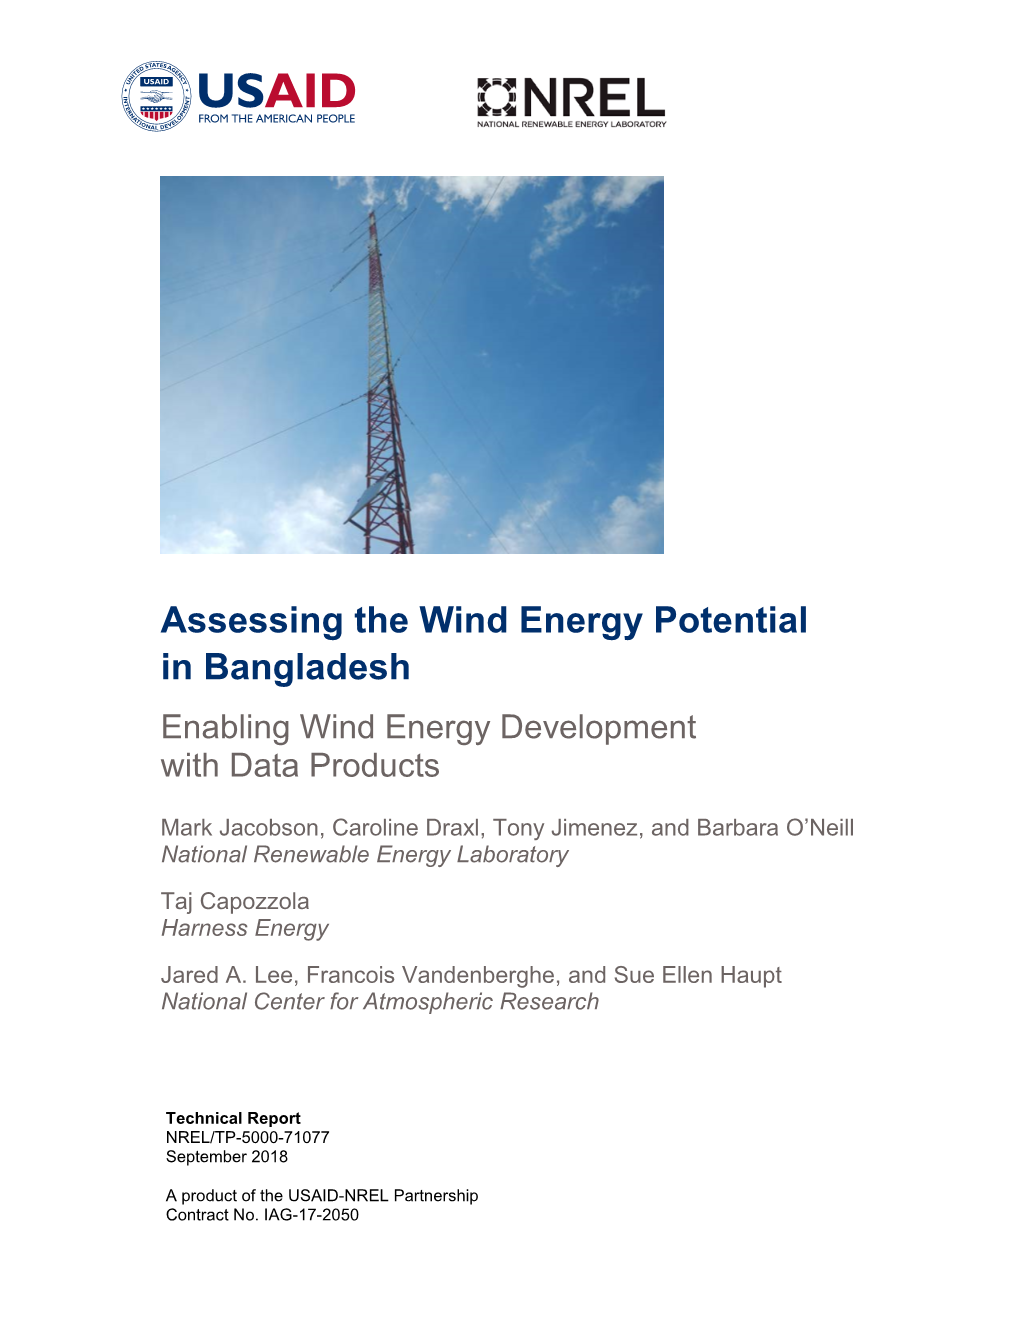 Assessing the Wind Energy Potential in Bangladesh Enabling Wind Energy Development with Data Products